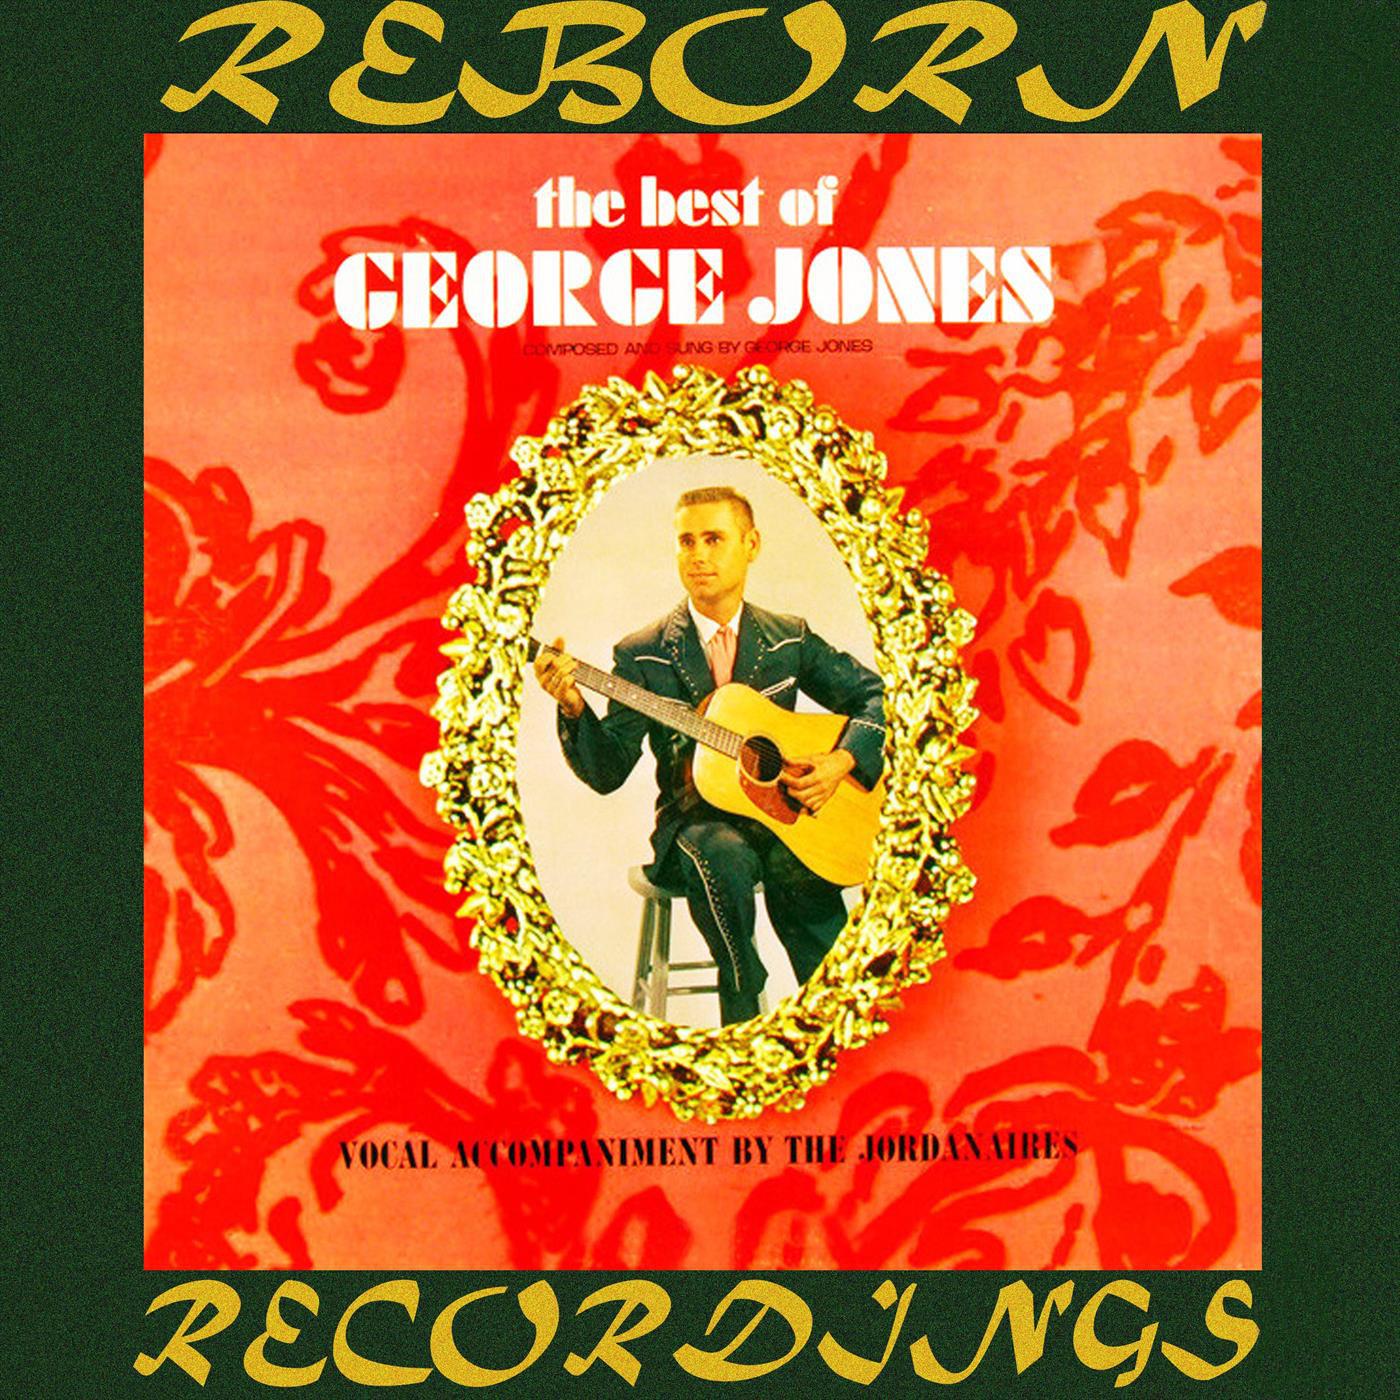 The Best Of George Jones, The United Artist 1962 Version (HD Remastered)